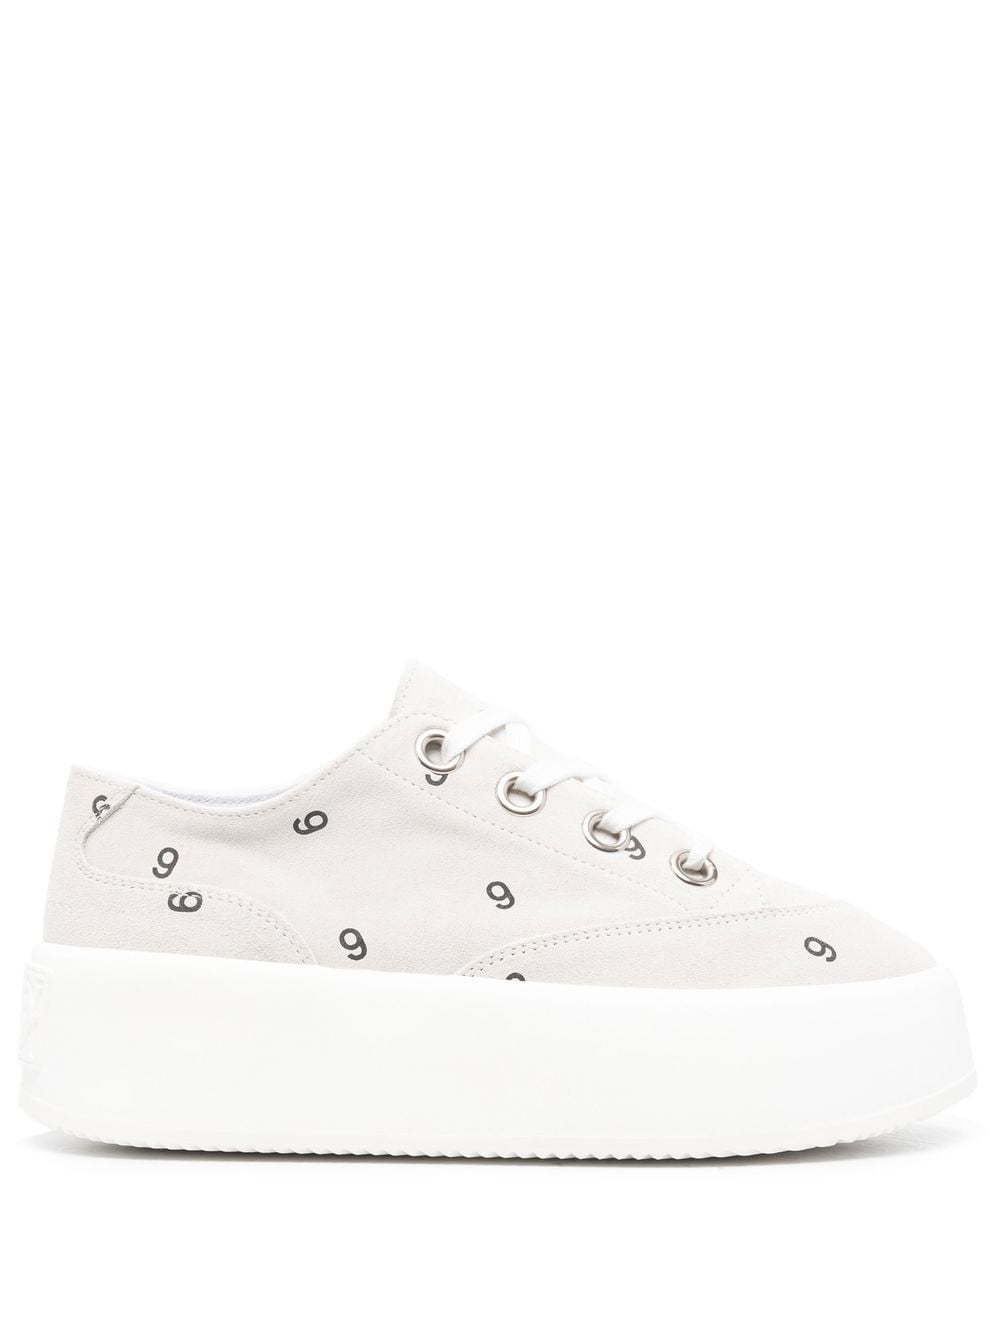 MM6 Maison Margiela platform low-top sneakers | Luxury and style at ...